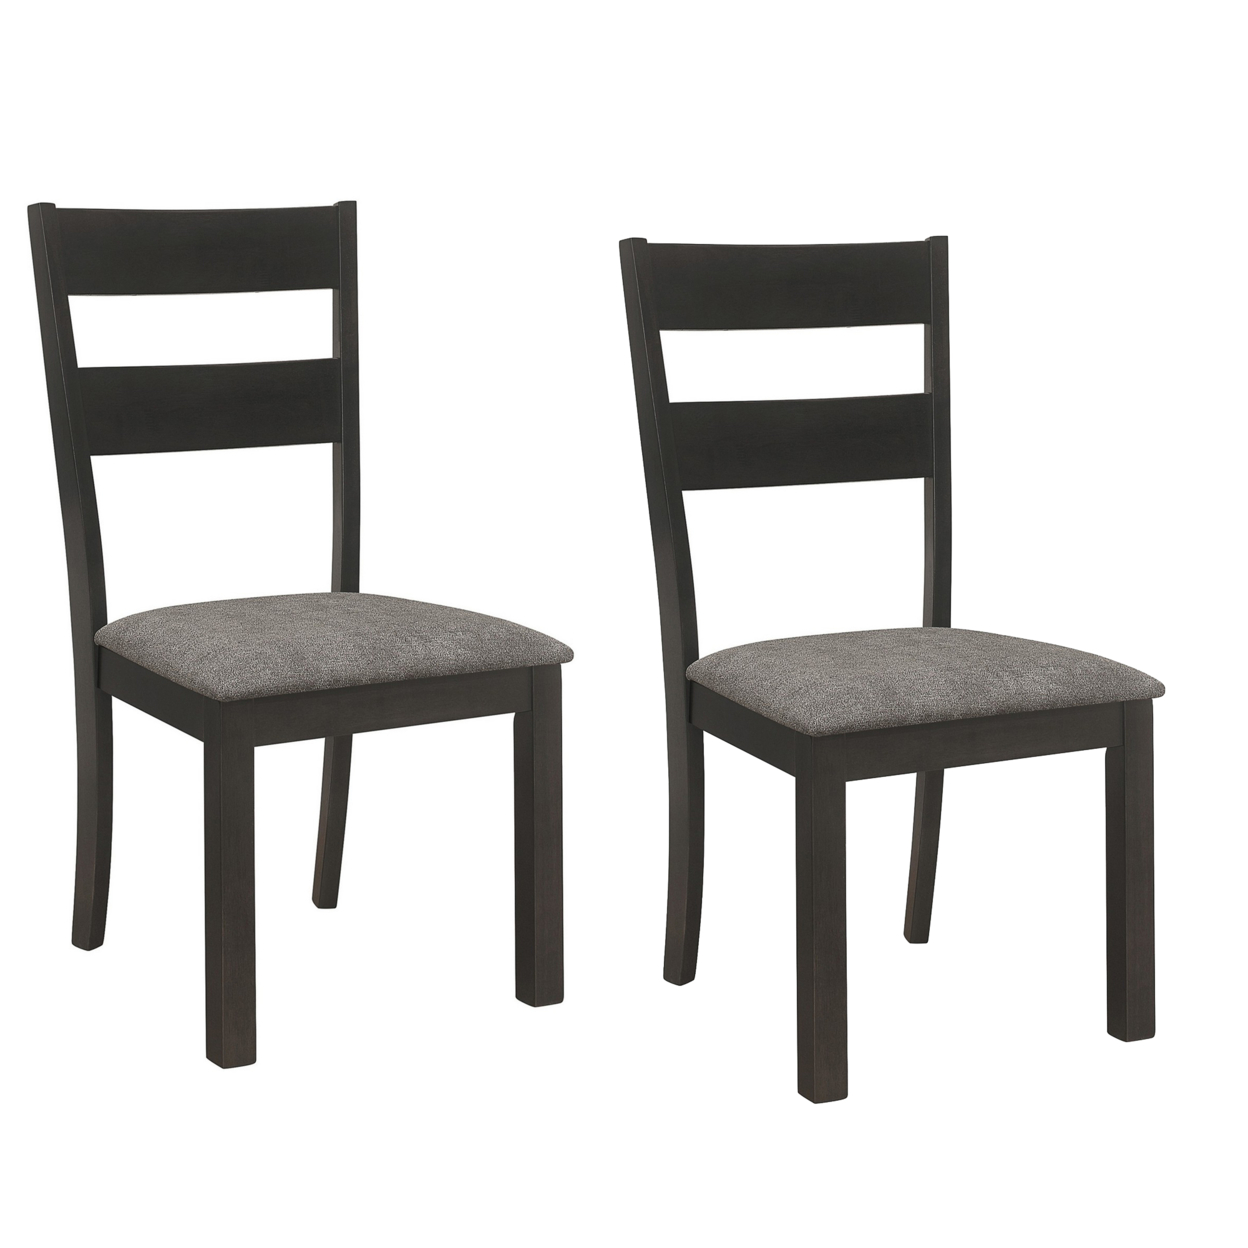 20 Inch Ladderback Dining Chair, Set Of 2, Gray Fabric, Stained Black Frame- Saltoro Sherpi